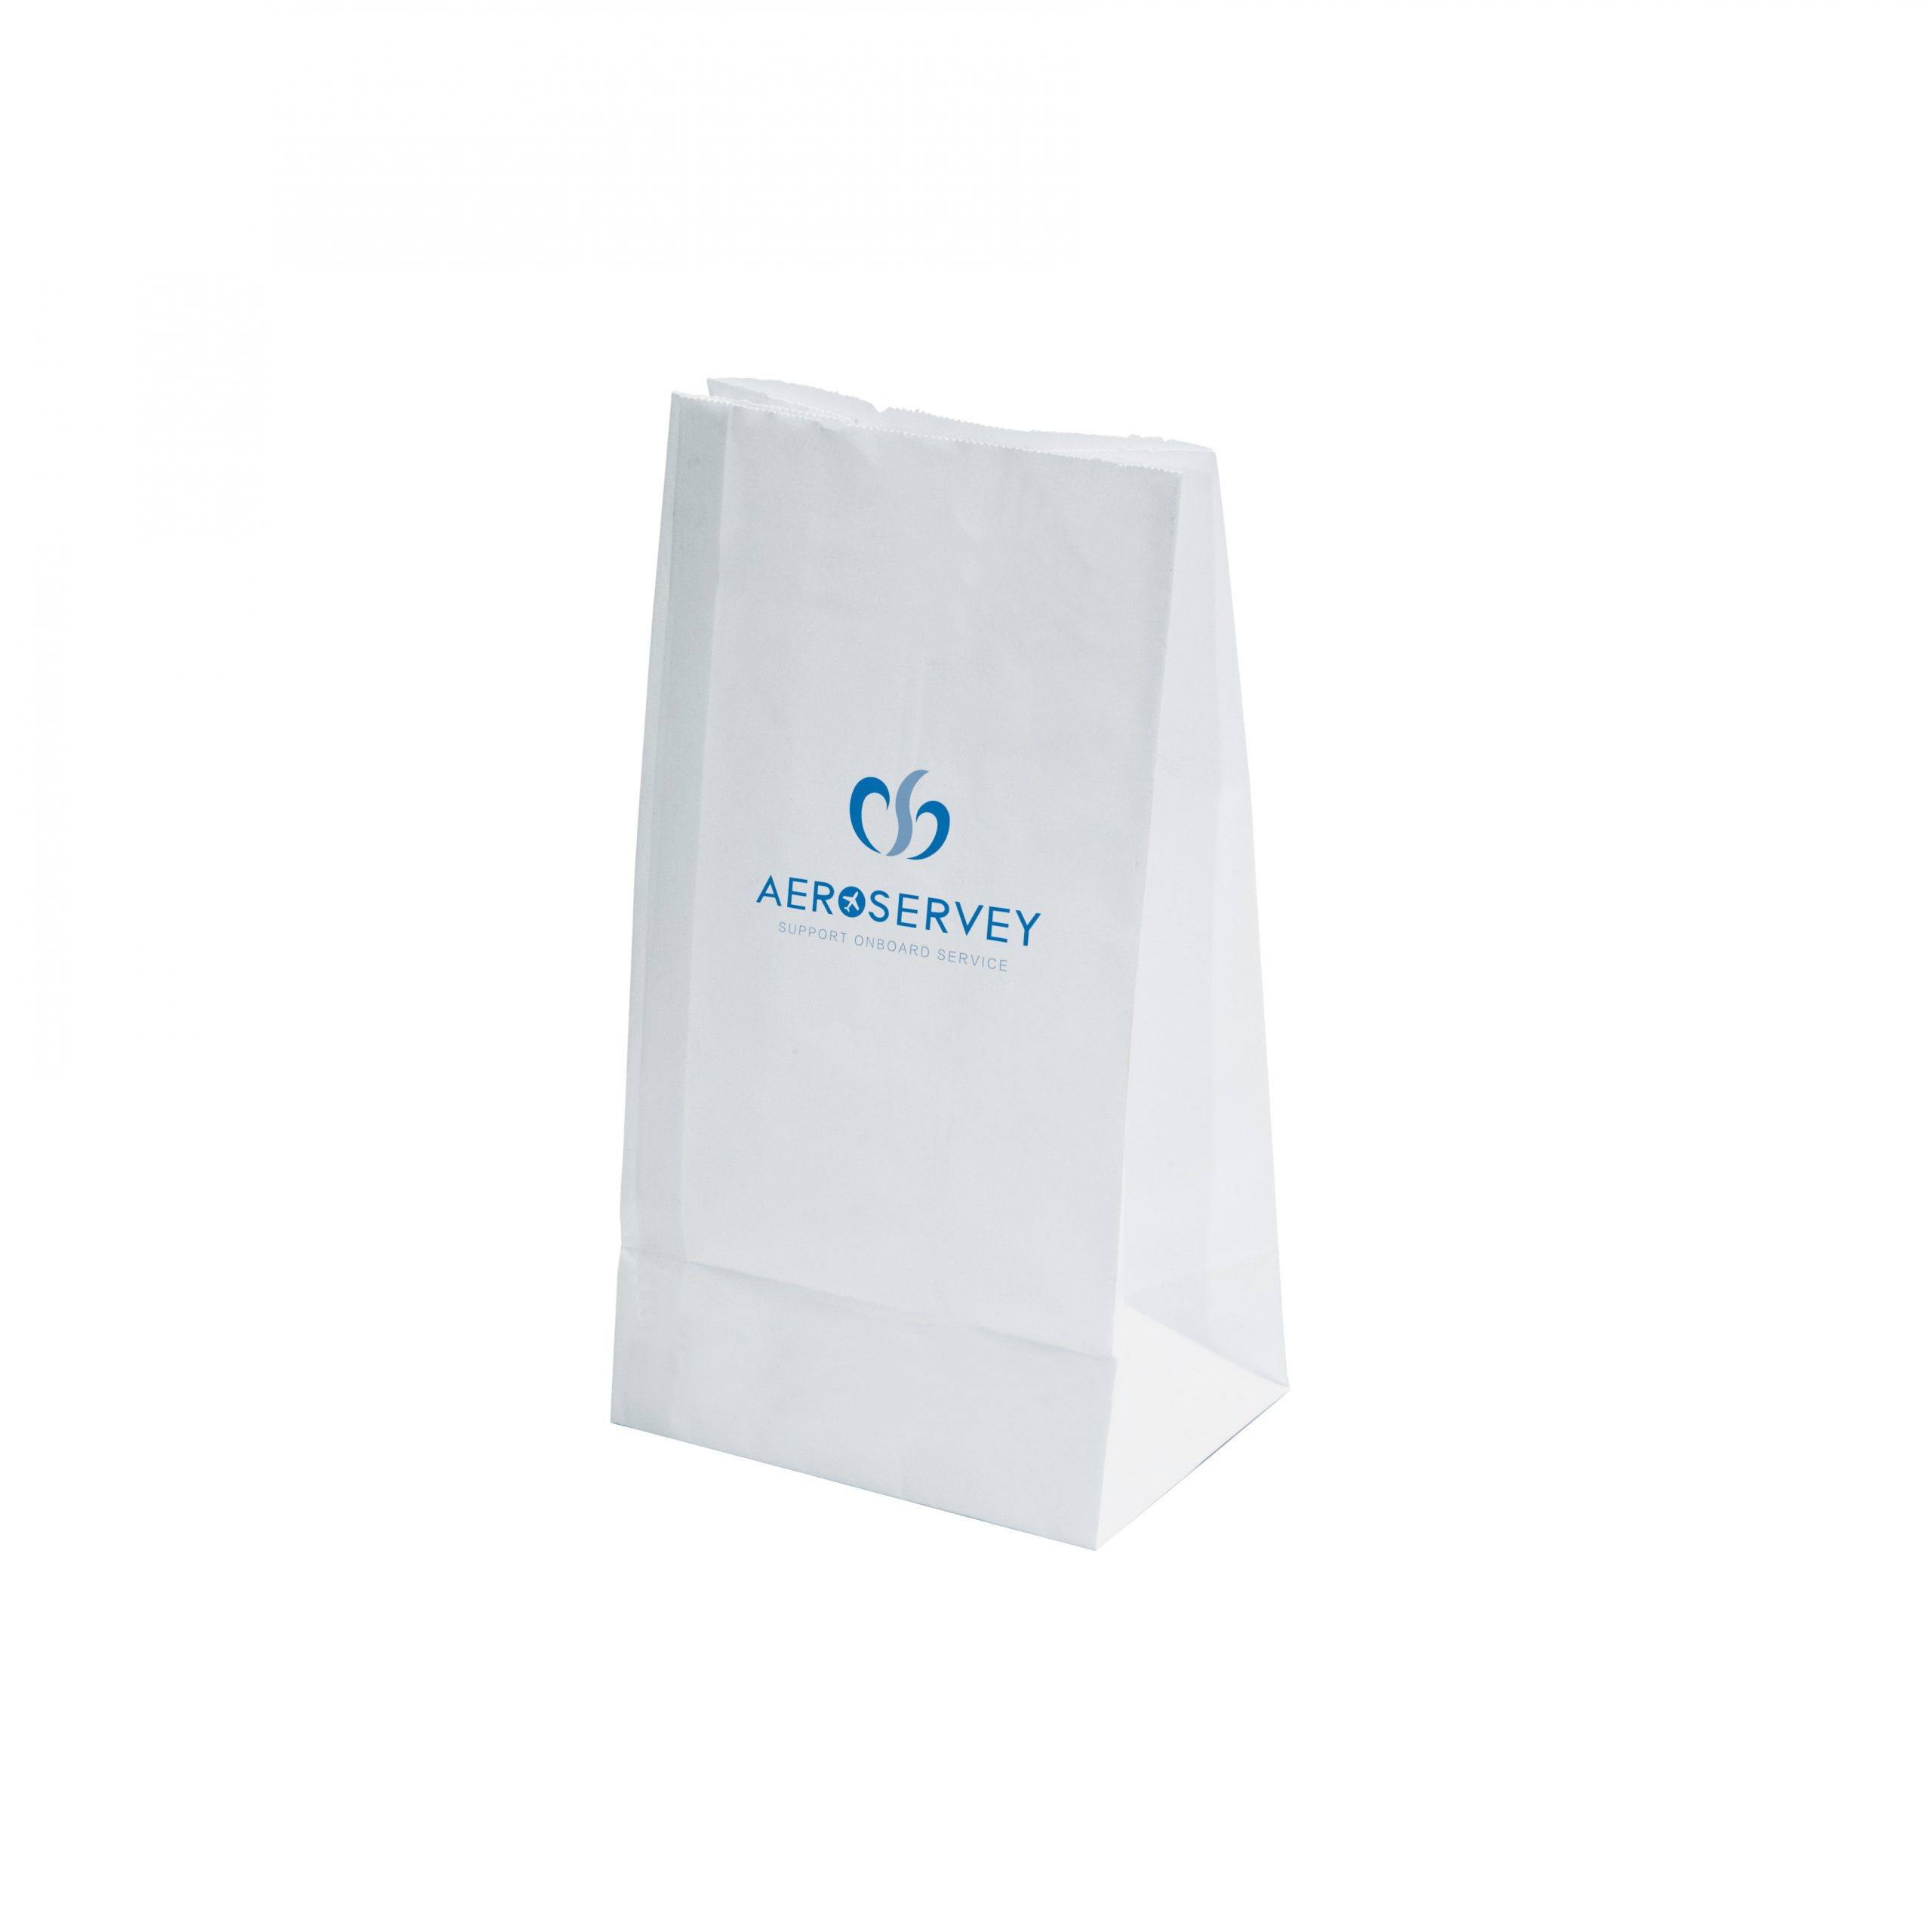 Aerosurvey Airsickness Bag - Airline Suppliers